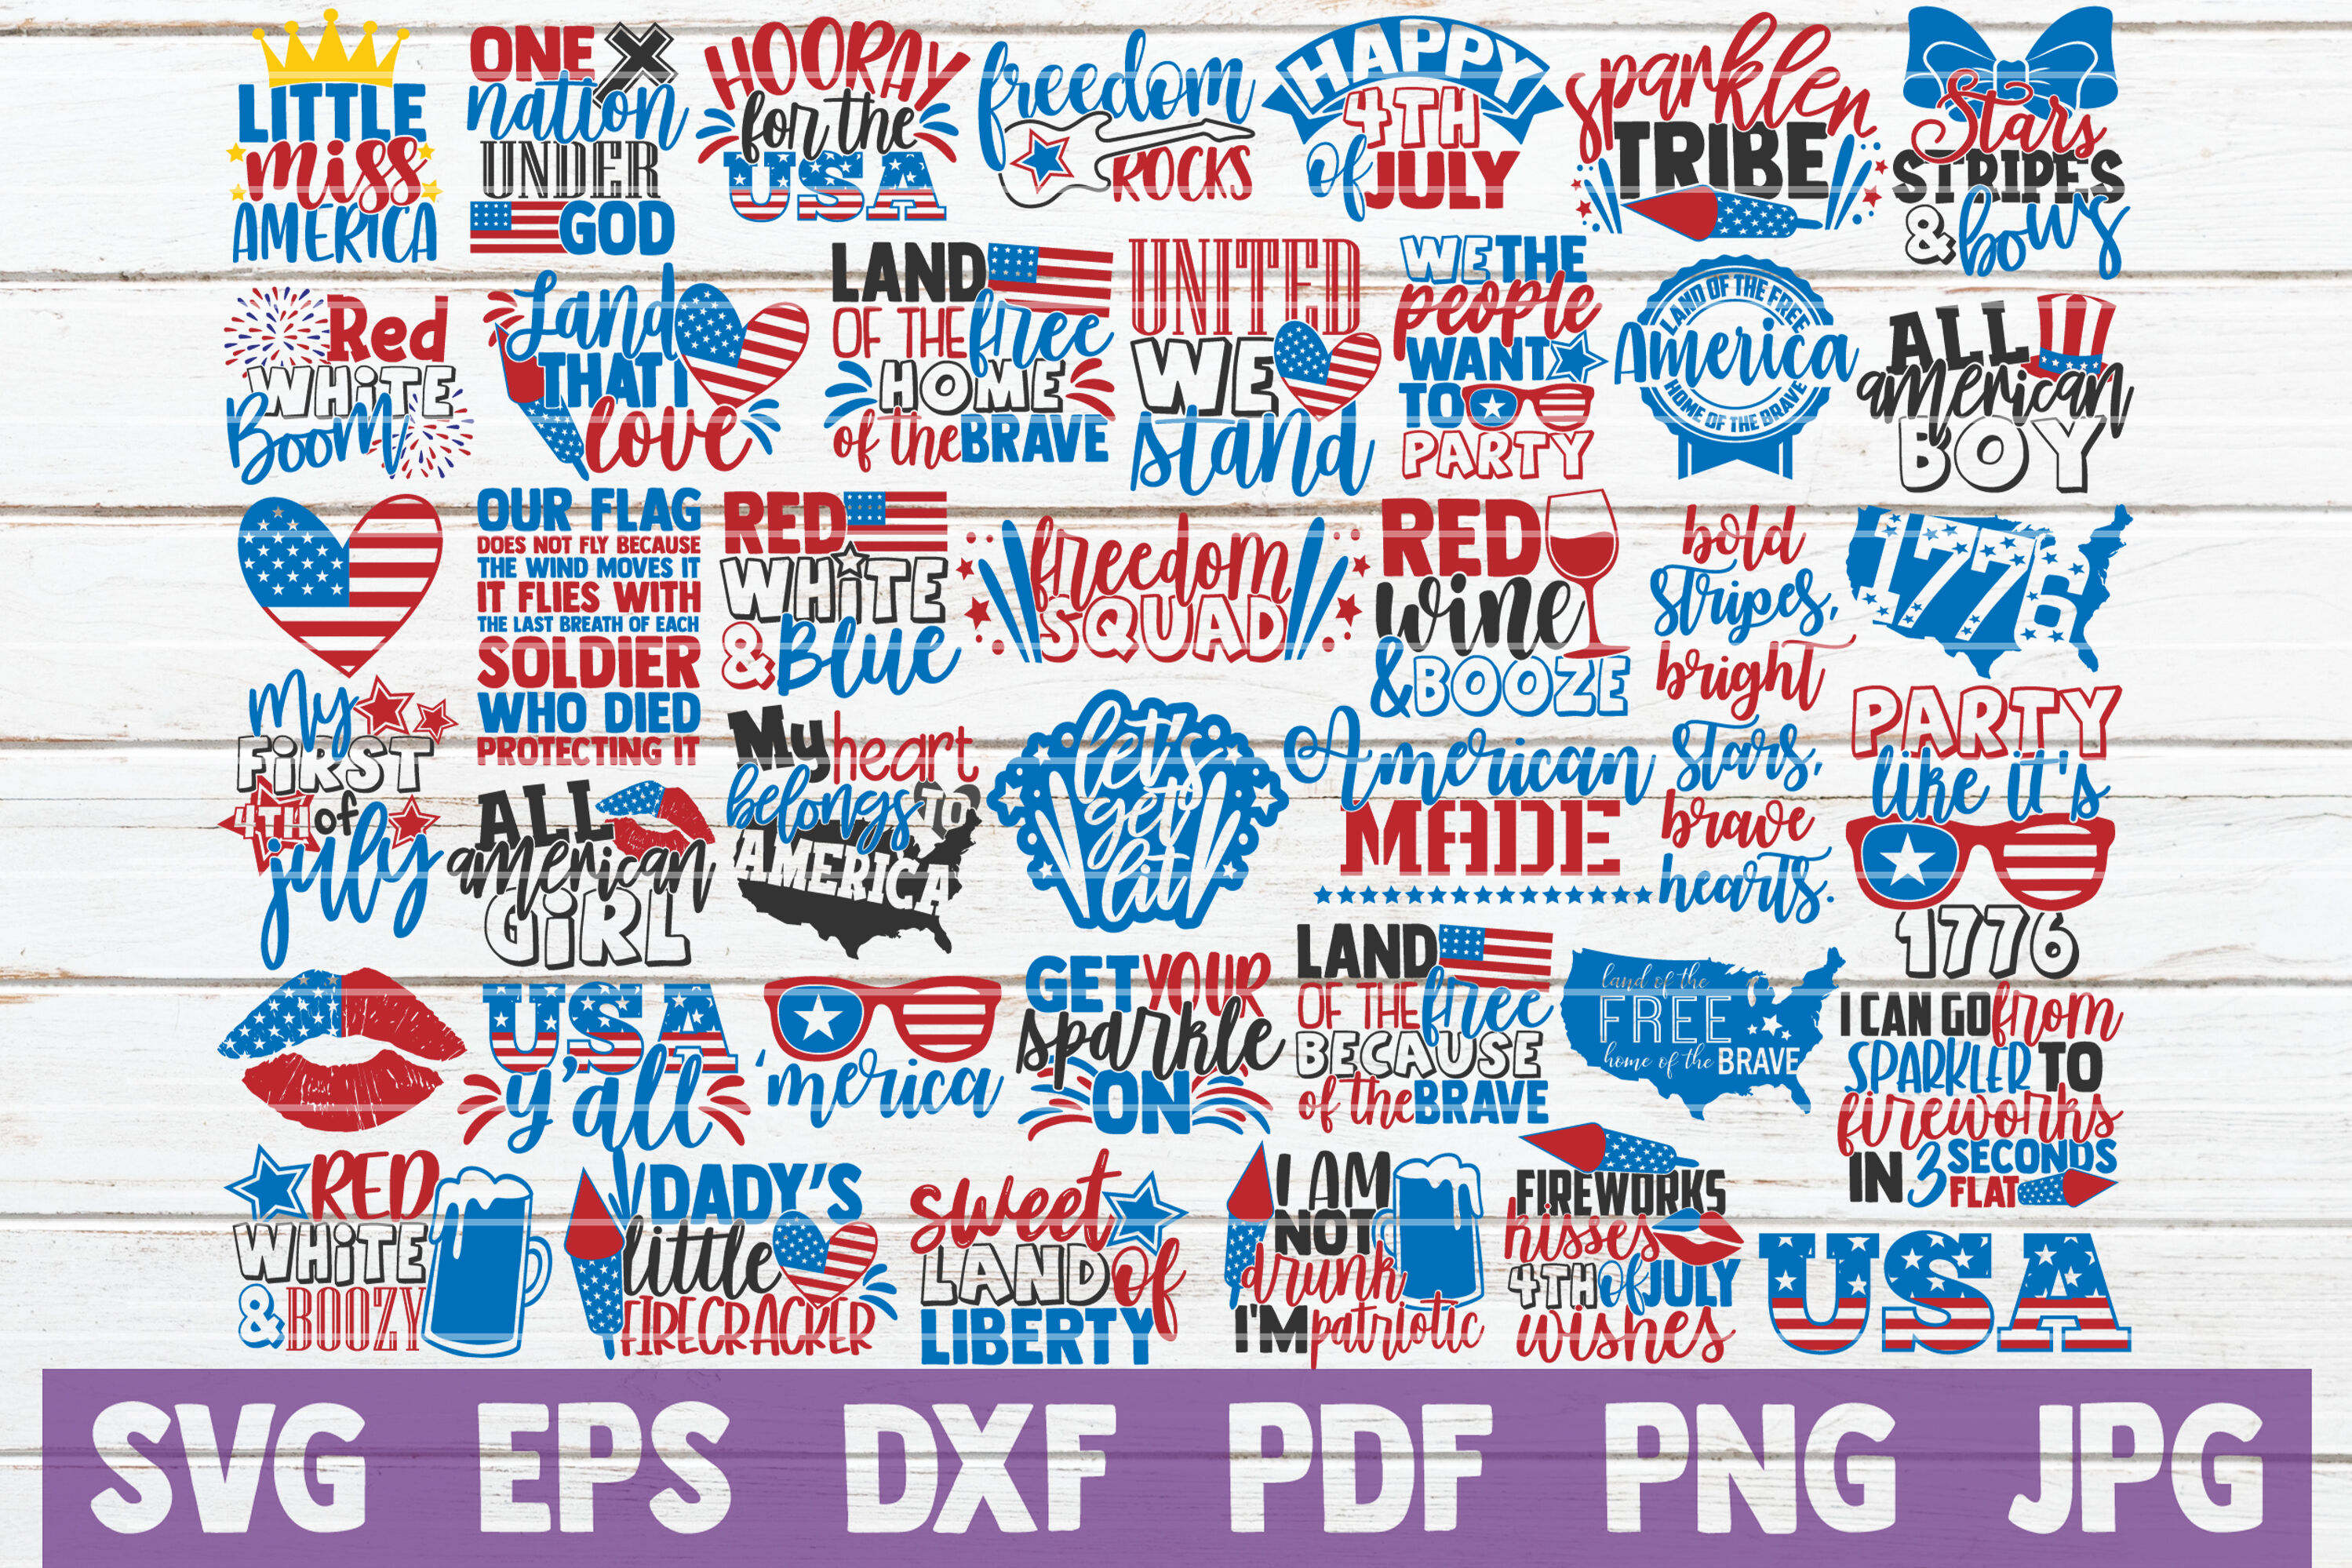 We The People Like To Party SVG PNG Drinking svg America svg Digital Download Cut Files for Cricut Independence Day 4th Of July